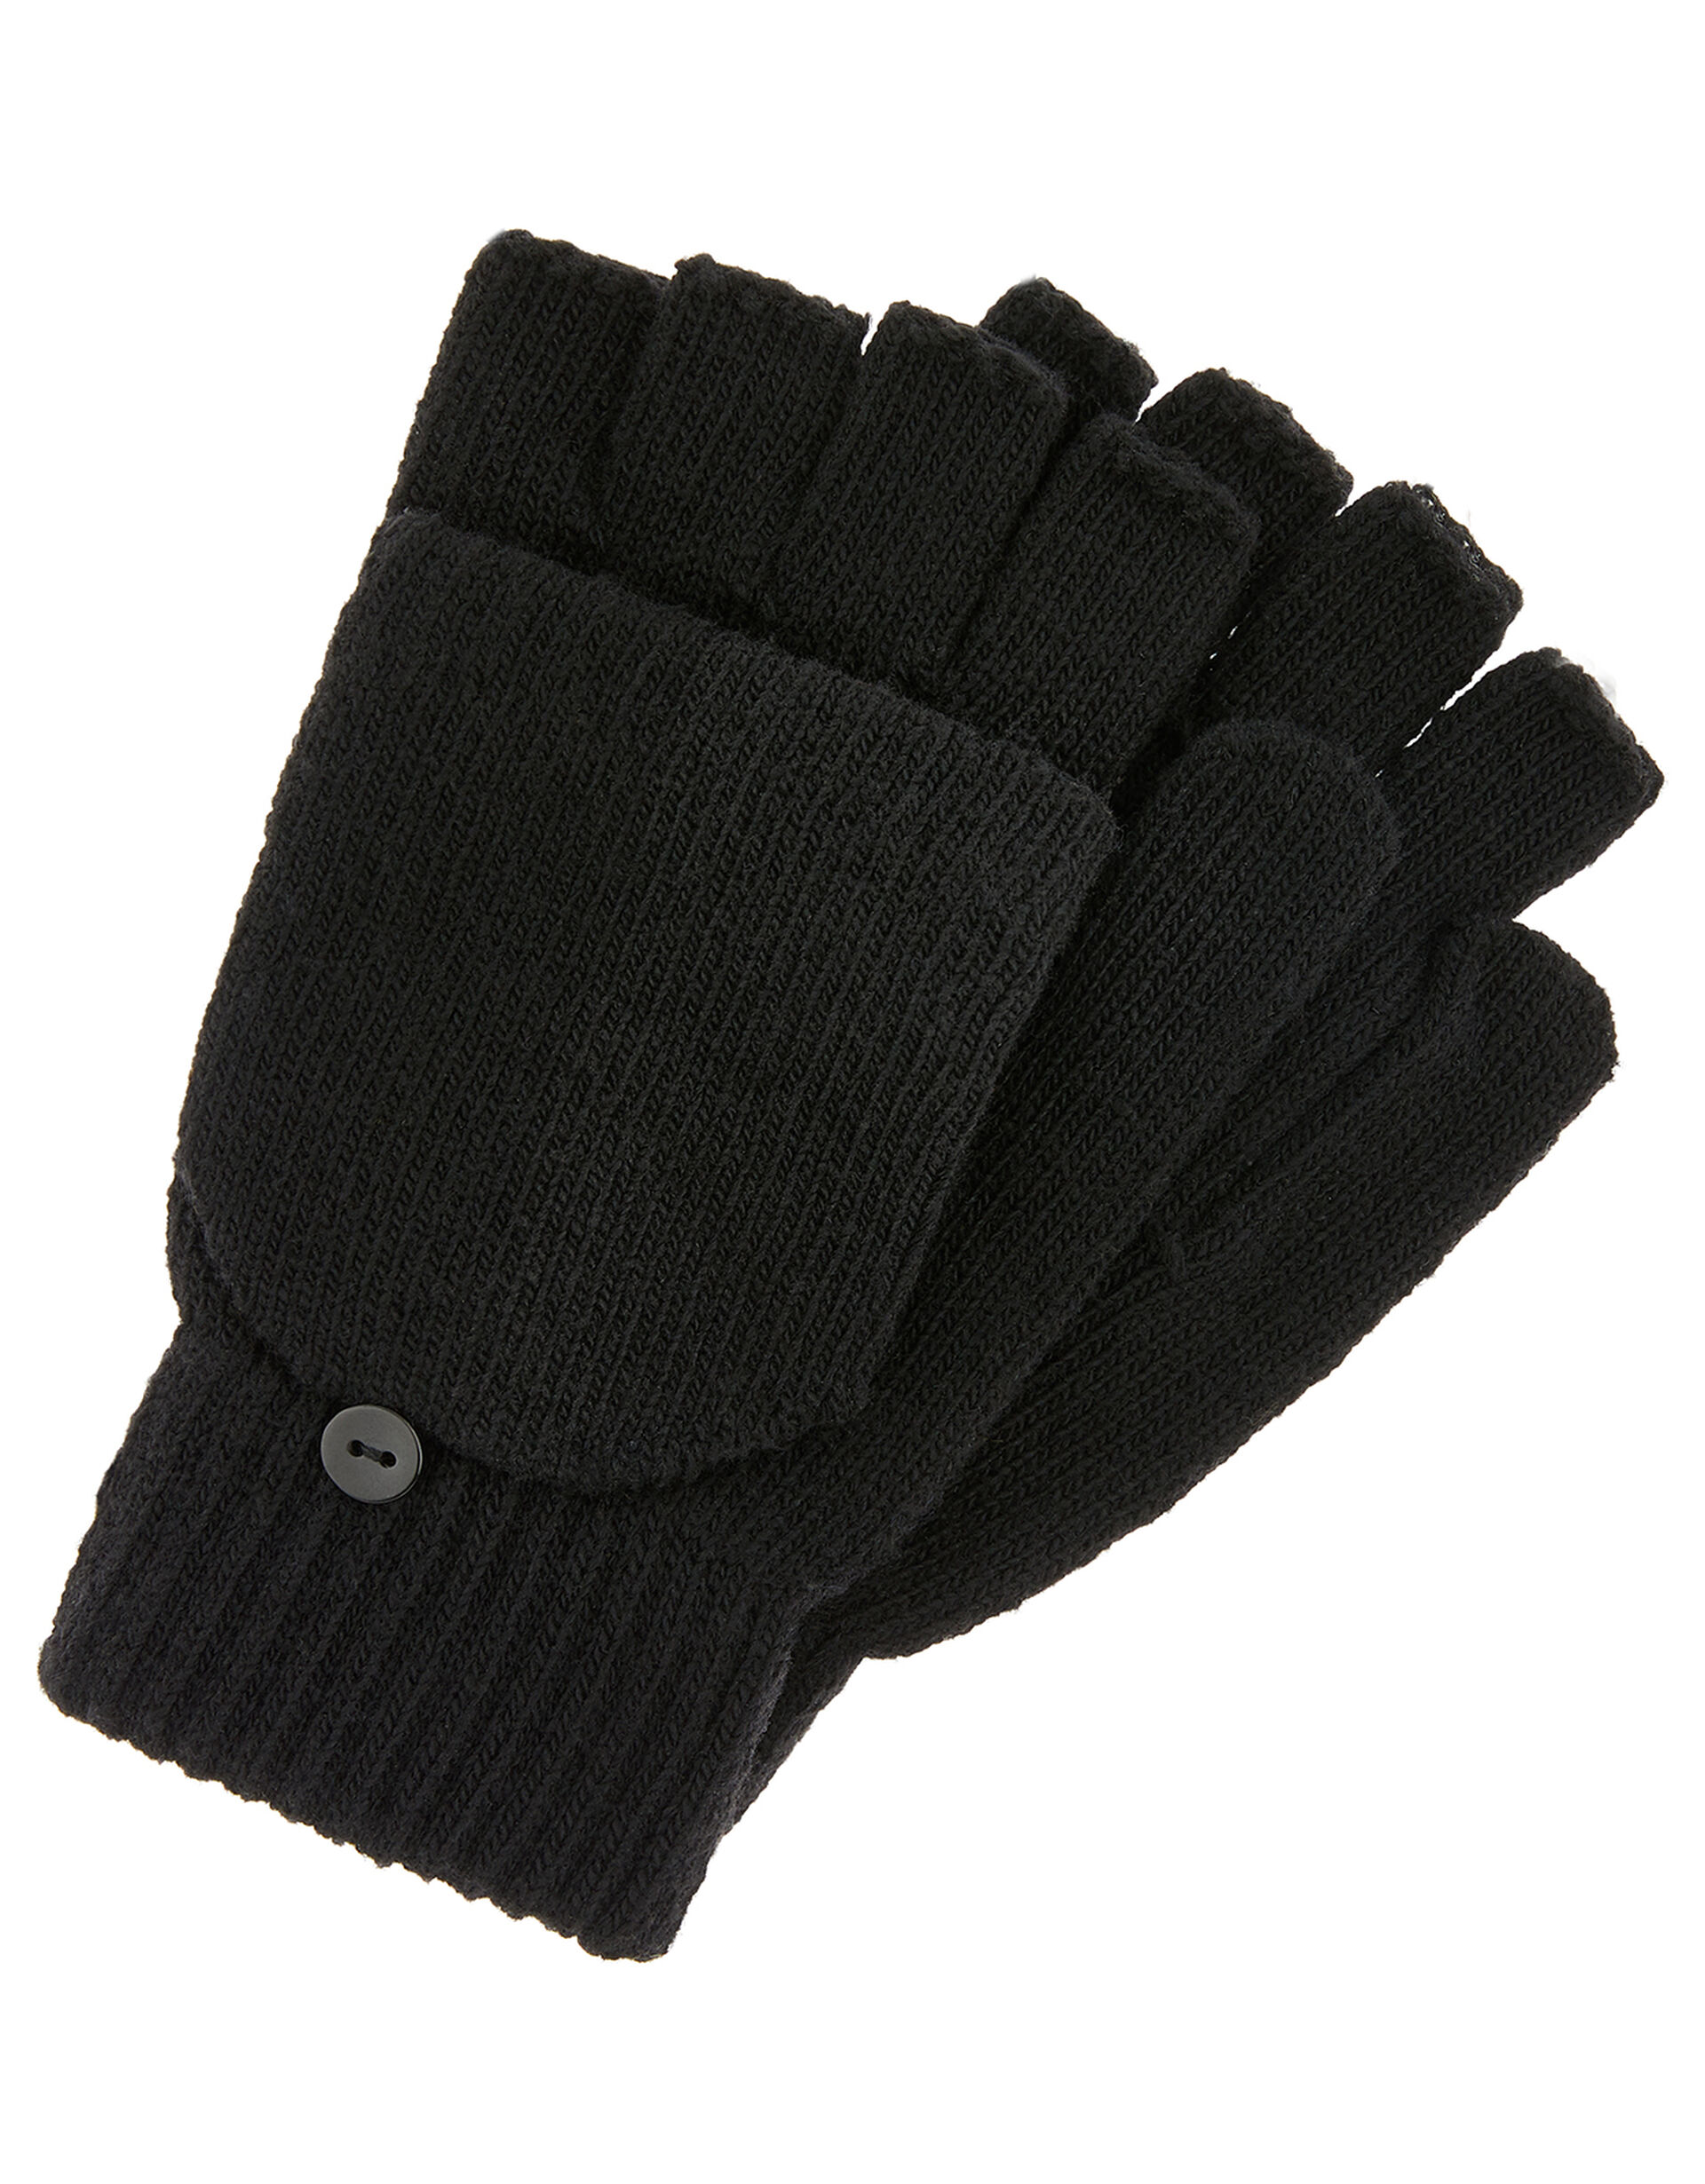 Capped Gloves with Recycled Polyester, Black (BLACK), large